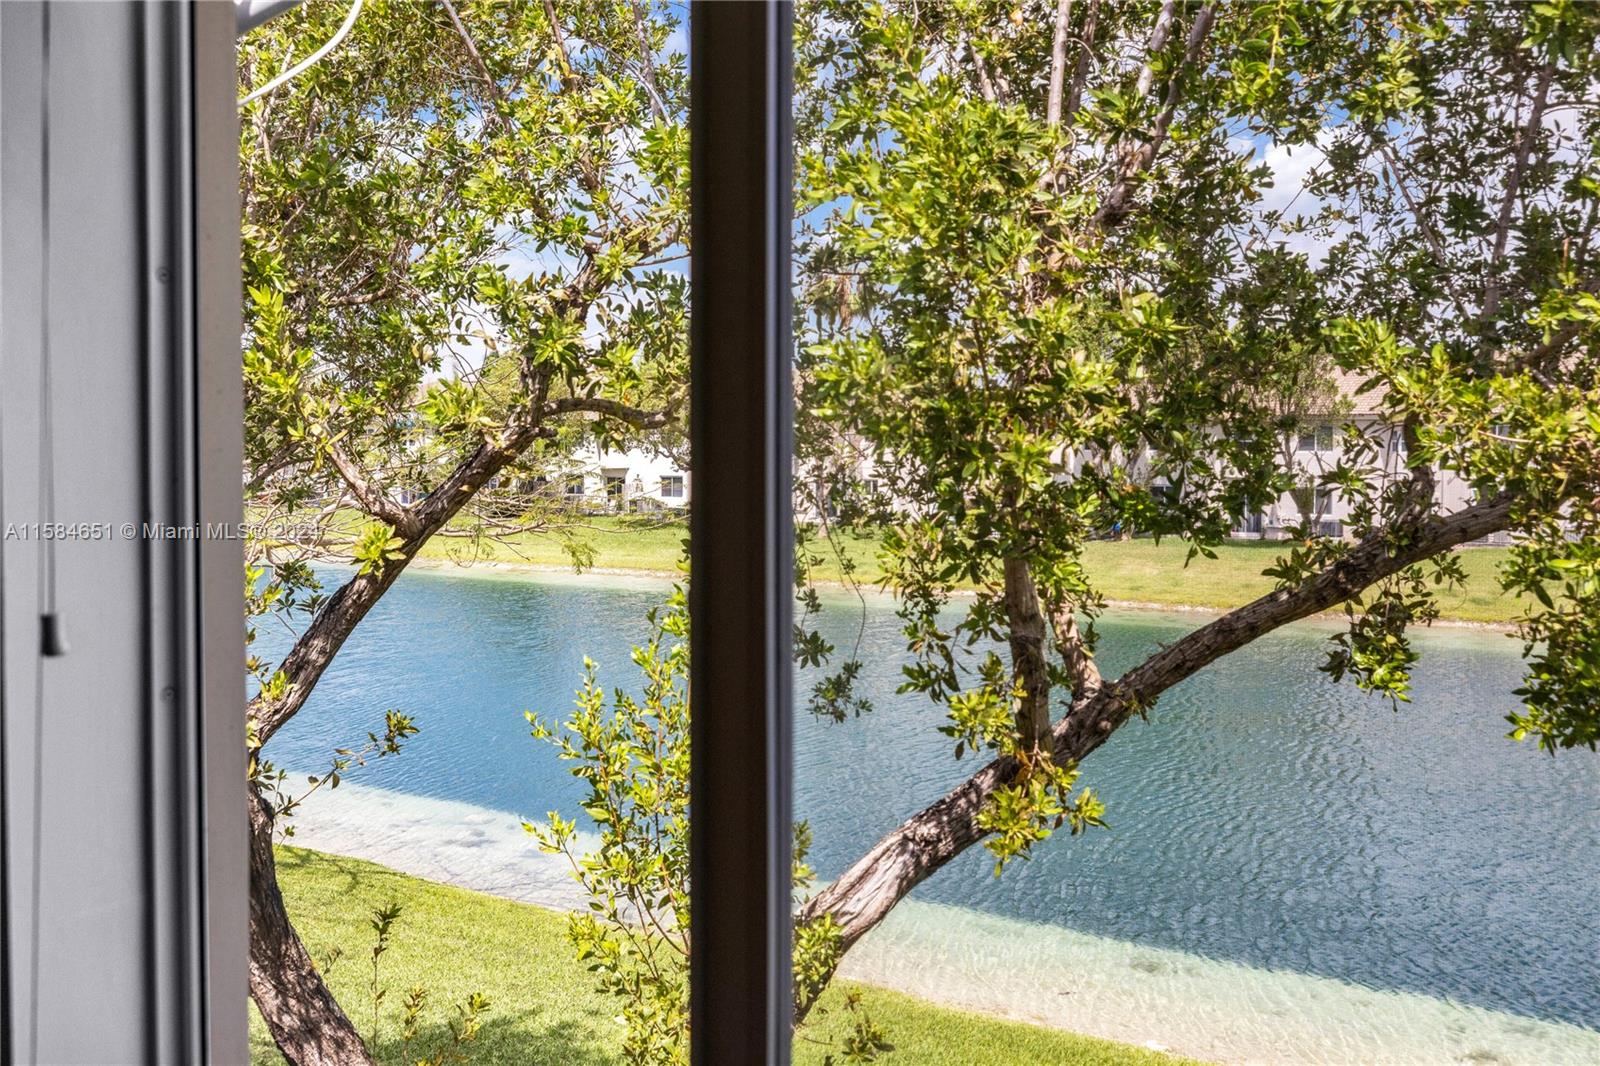 a view of a lake from a window